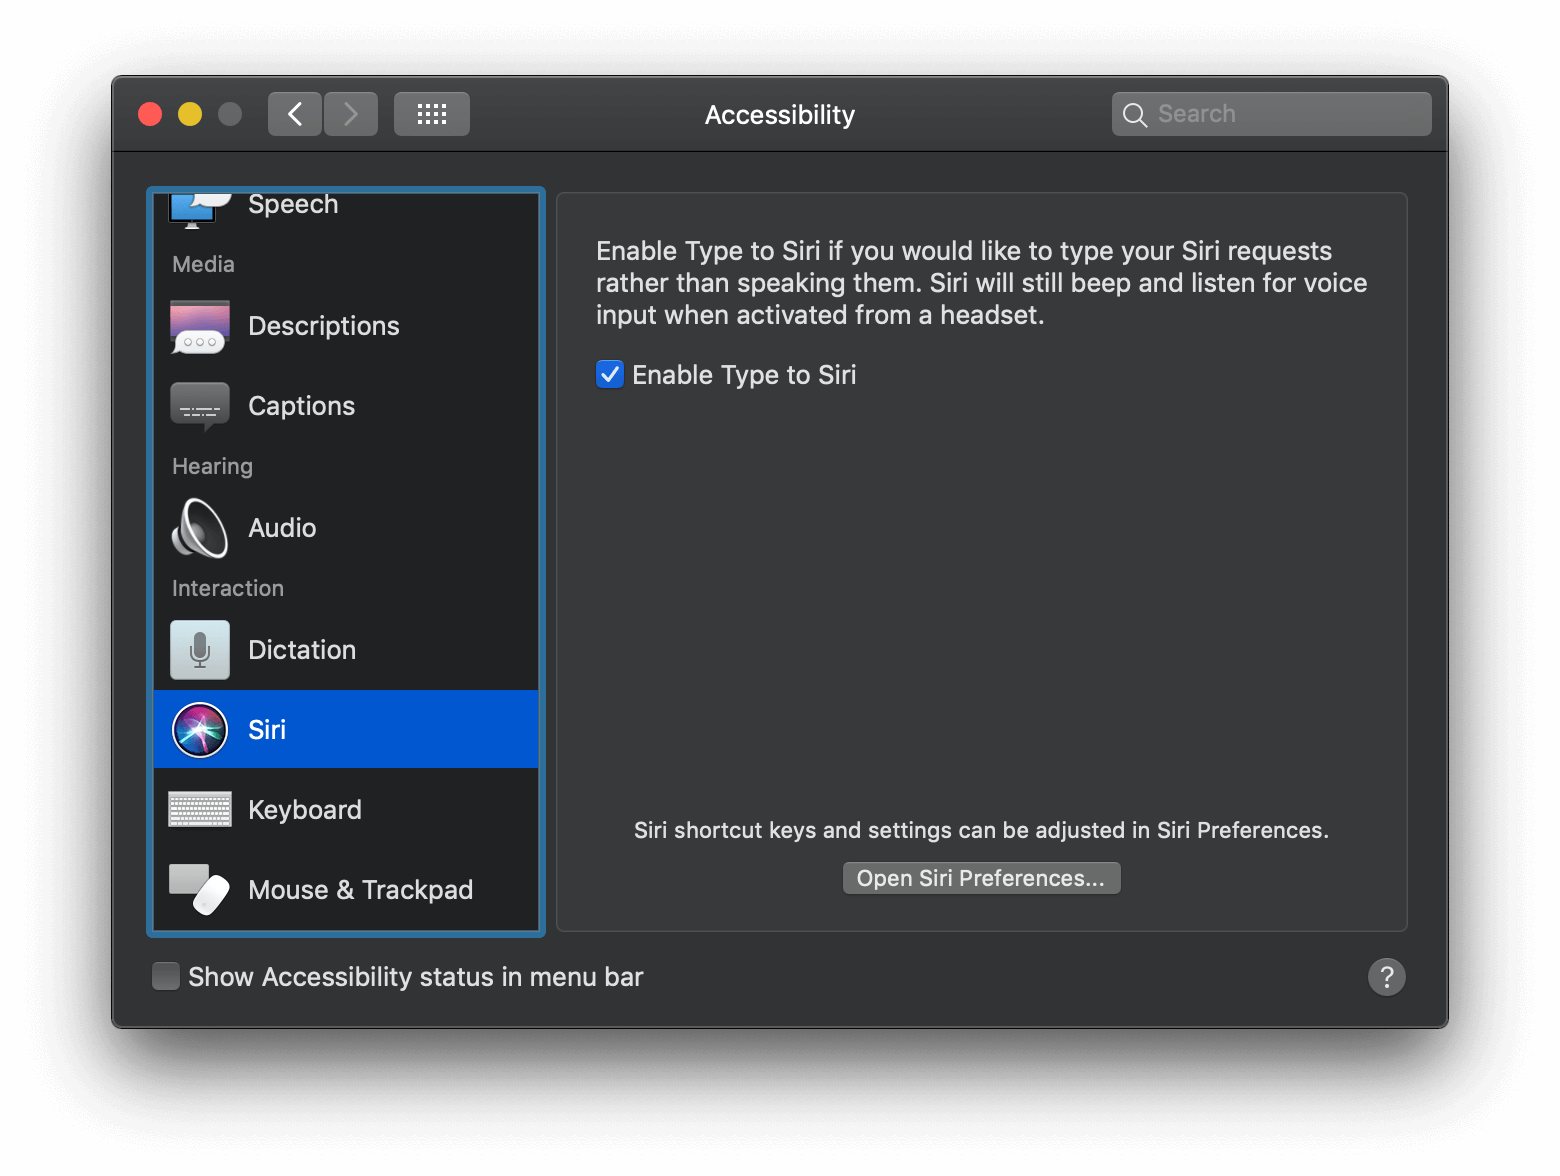 Enable Type to Siri option enabled in Accessibility Preferences